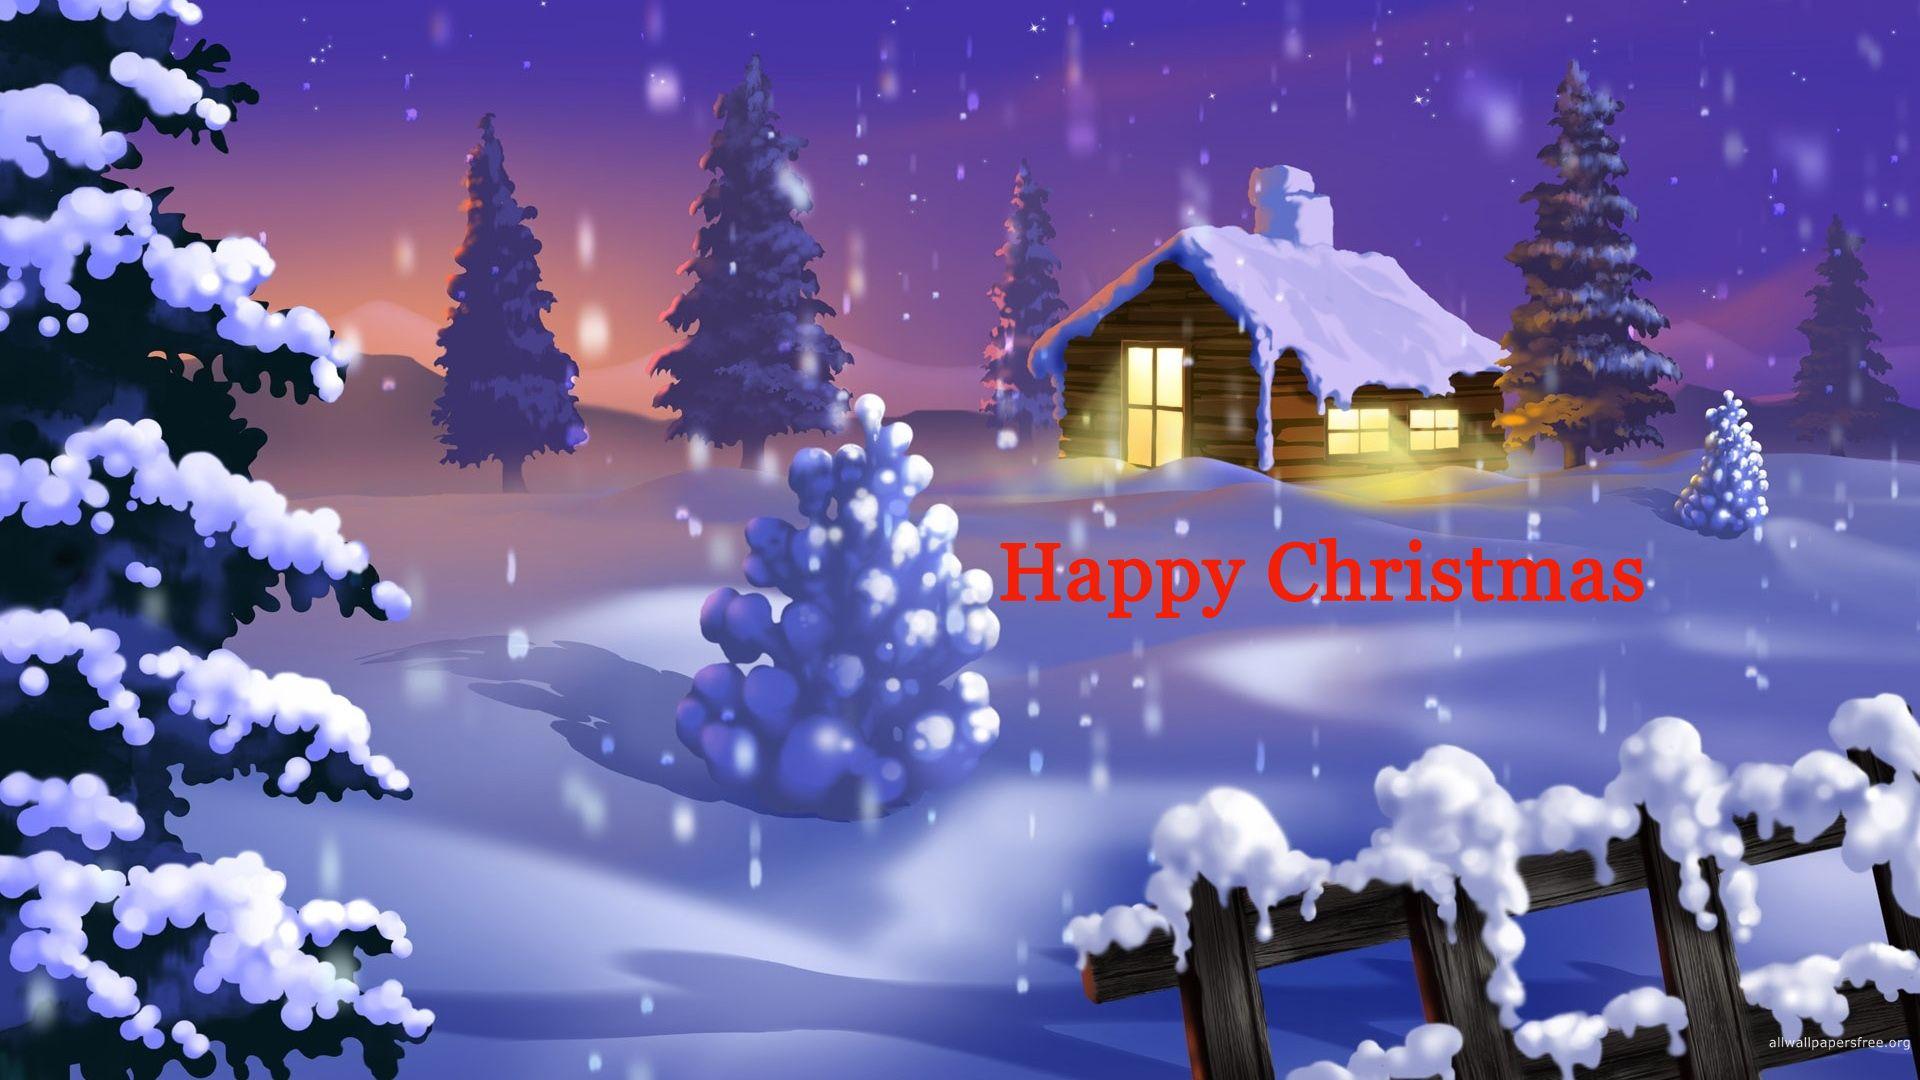 Merry Christmas Wallpaper 6. All Top Post